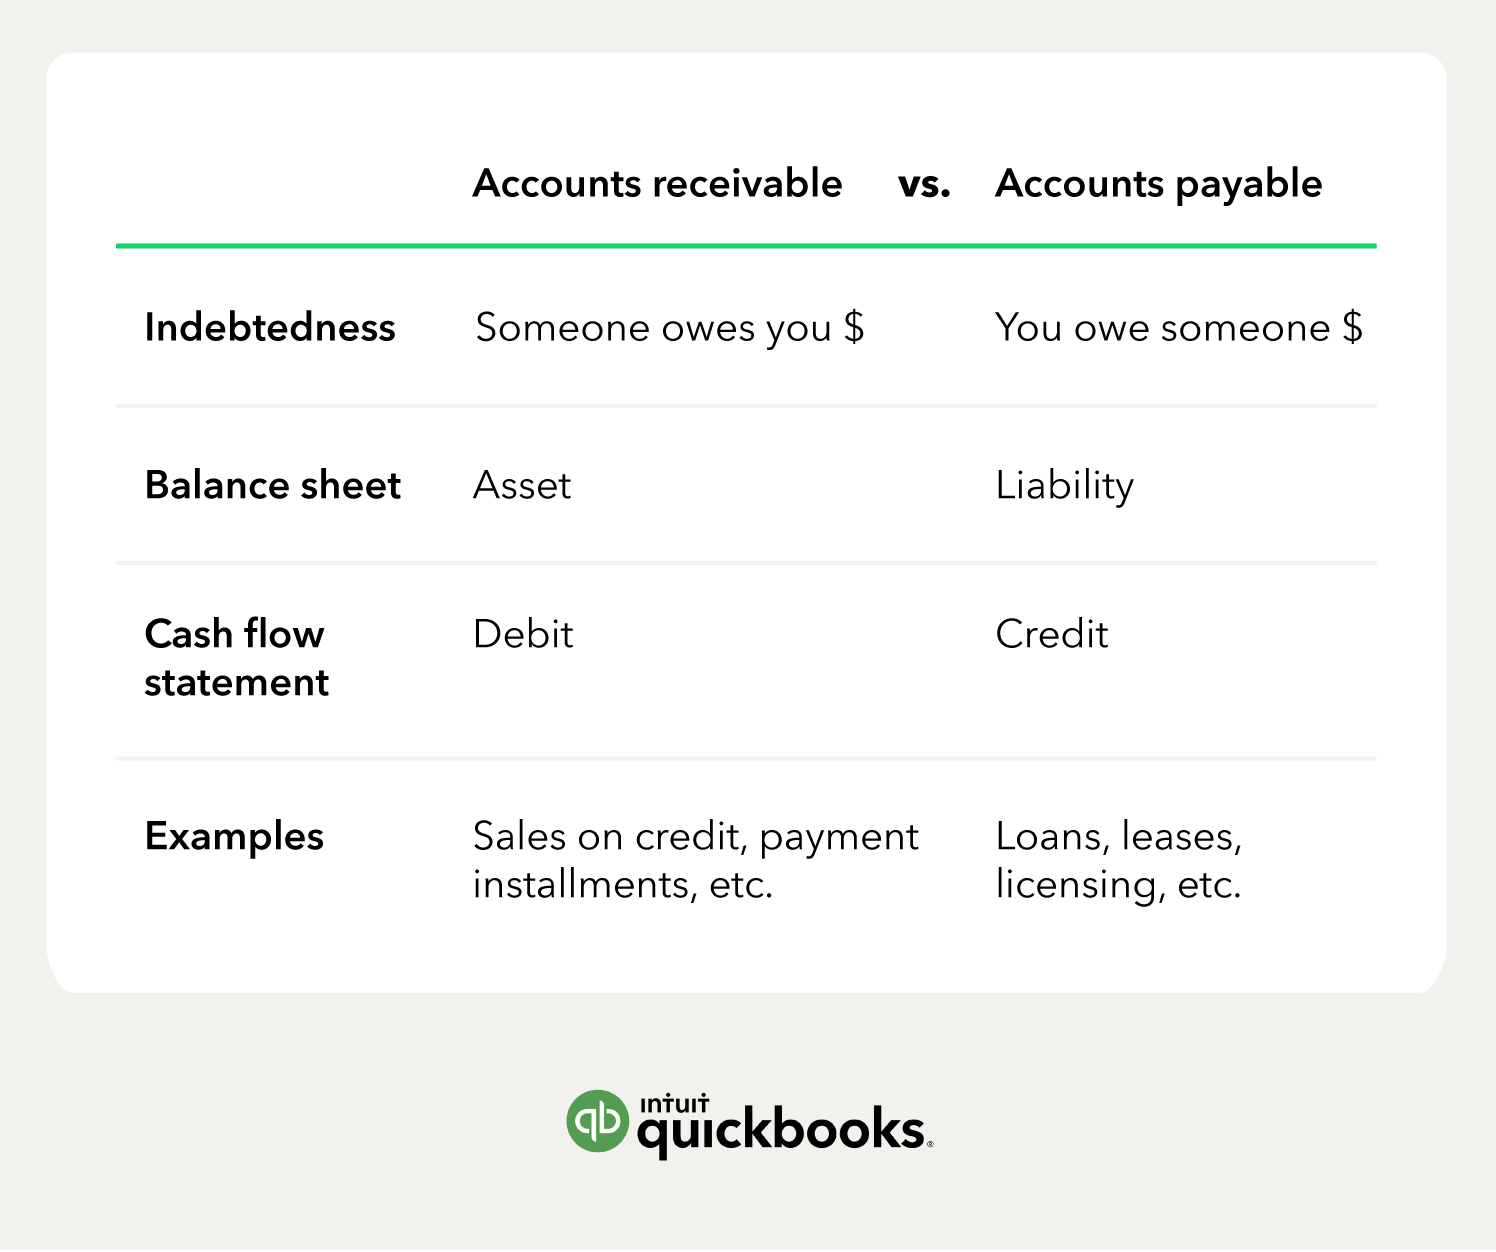 A chart showing the differences between accounts receivable and accounts payable. Next to indebtedness it is shown that someone owing you money is accounts receivable. You owing someone money is accounts payable. On a balance sheet, an asset goes in accounts receivable, while liabilities go in accounts payable. On cash flow statements, debits are accounts receivable; credits are accounts payable. Two included examples are sales on credit, payment, installments, etc. (accounts receivable) and loans, leases, licensing, etc. (accounts payable).